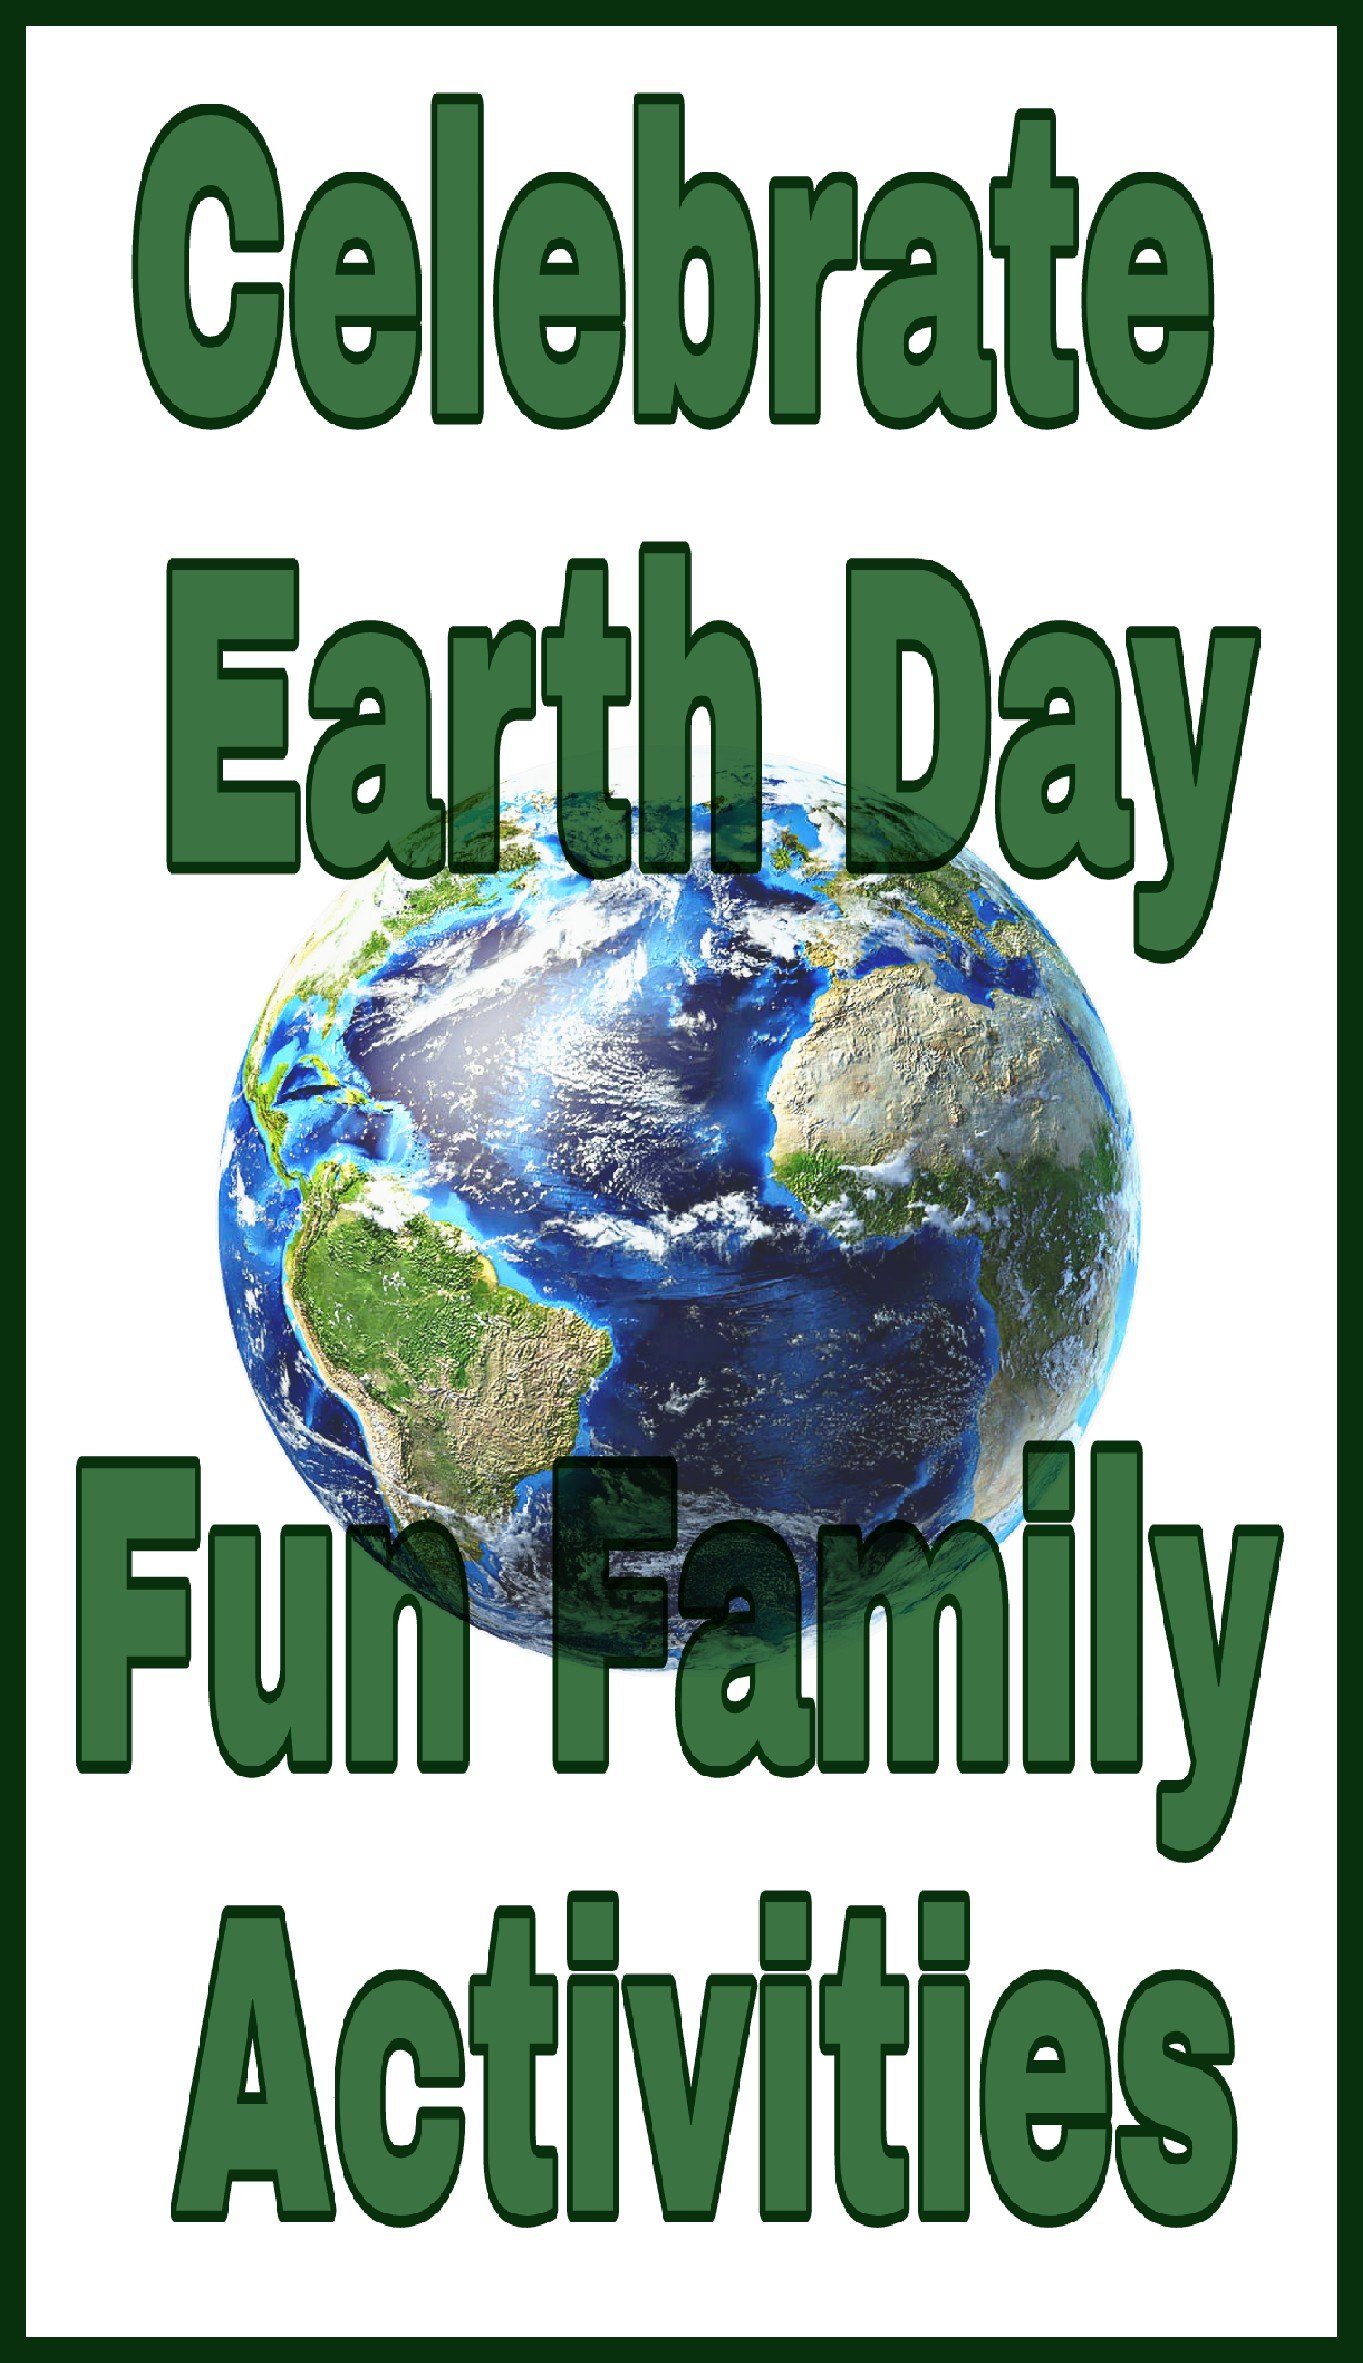 Fun Family Activities To Celebrate Earth Day!